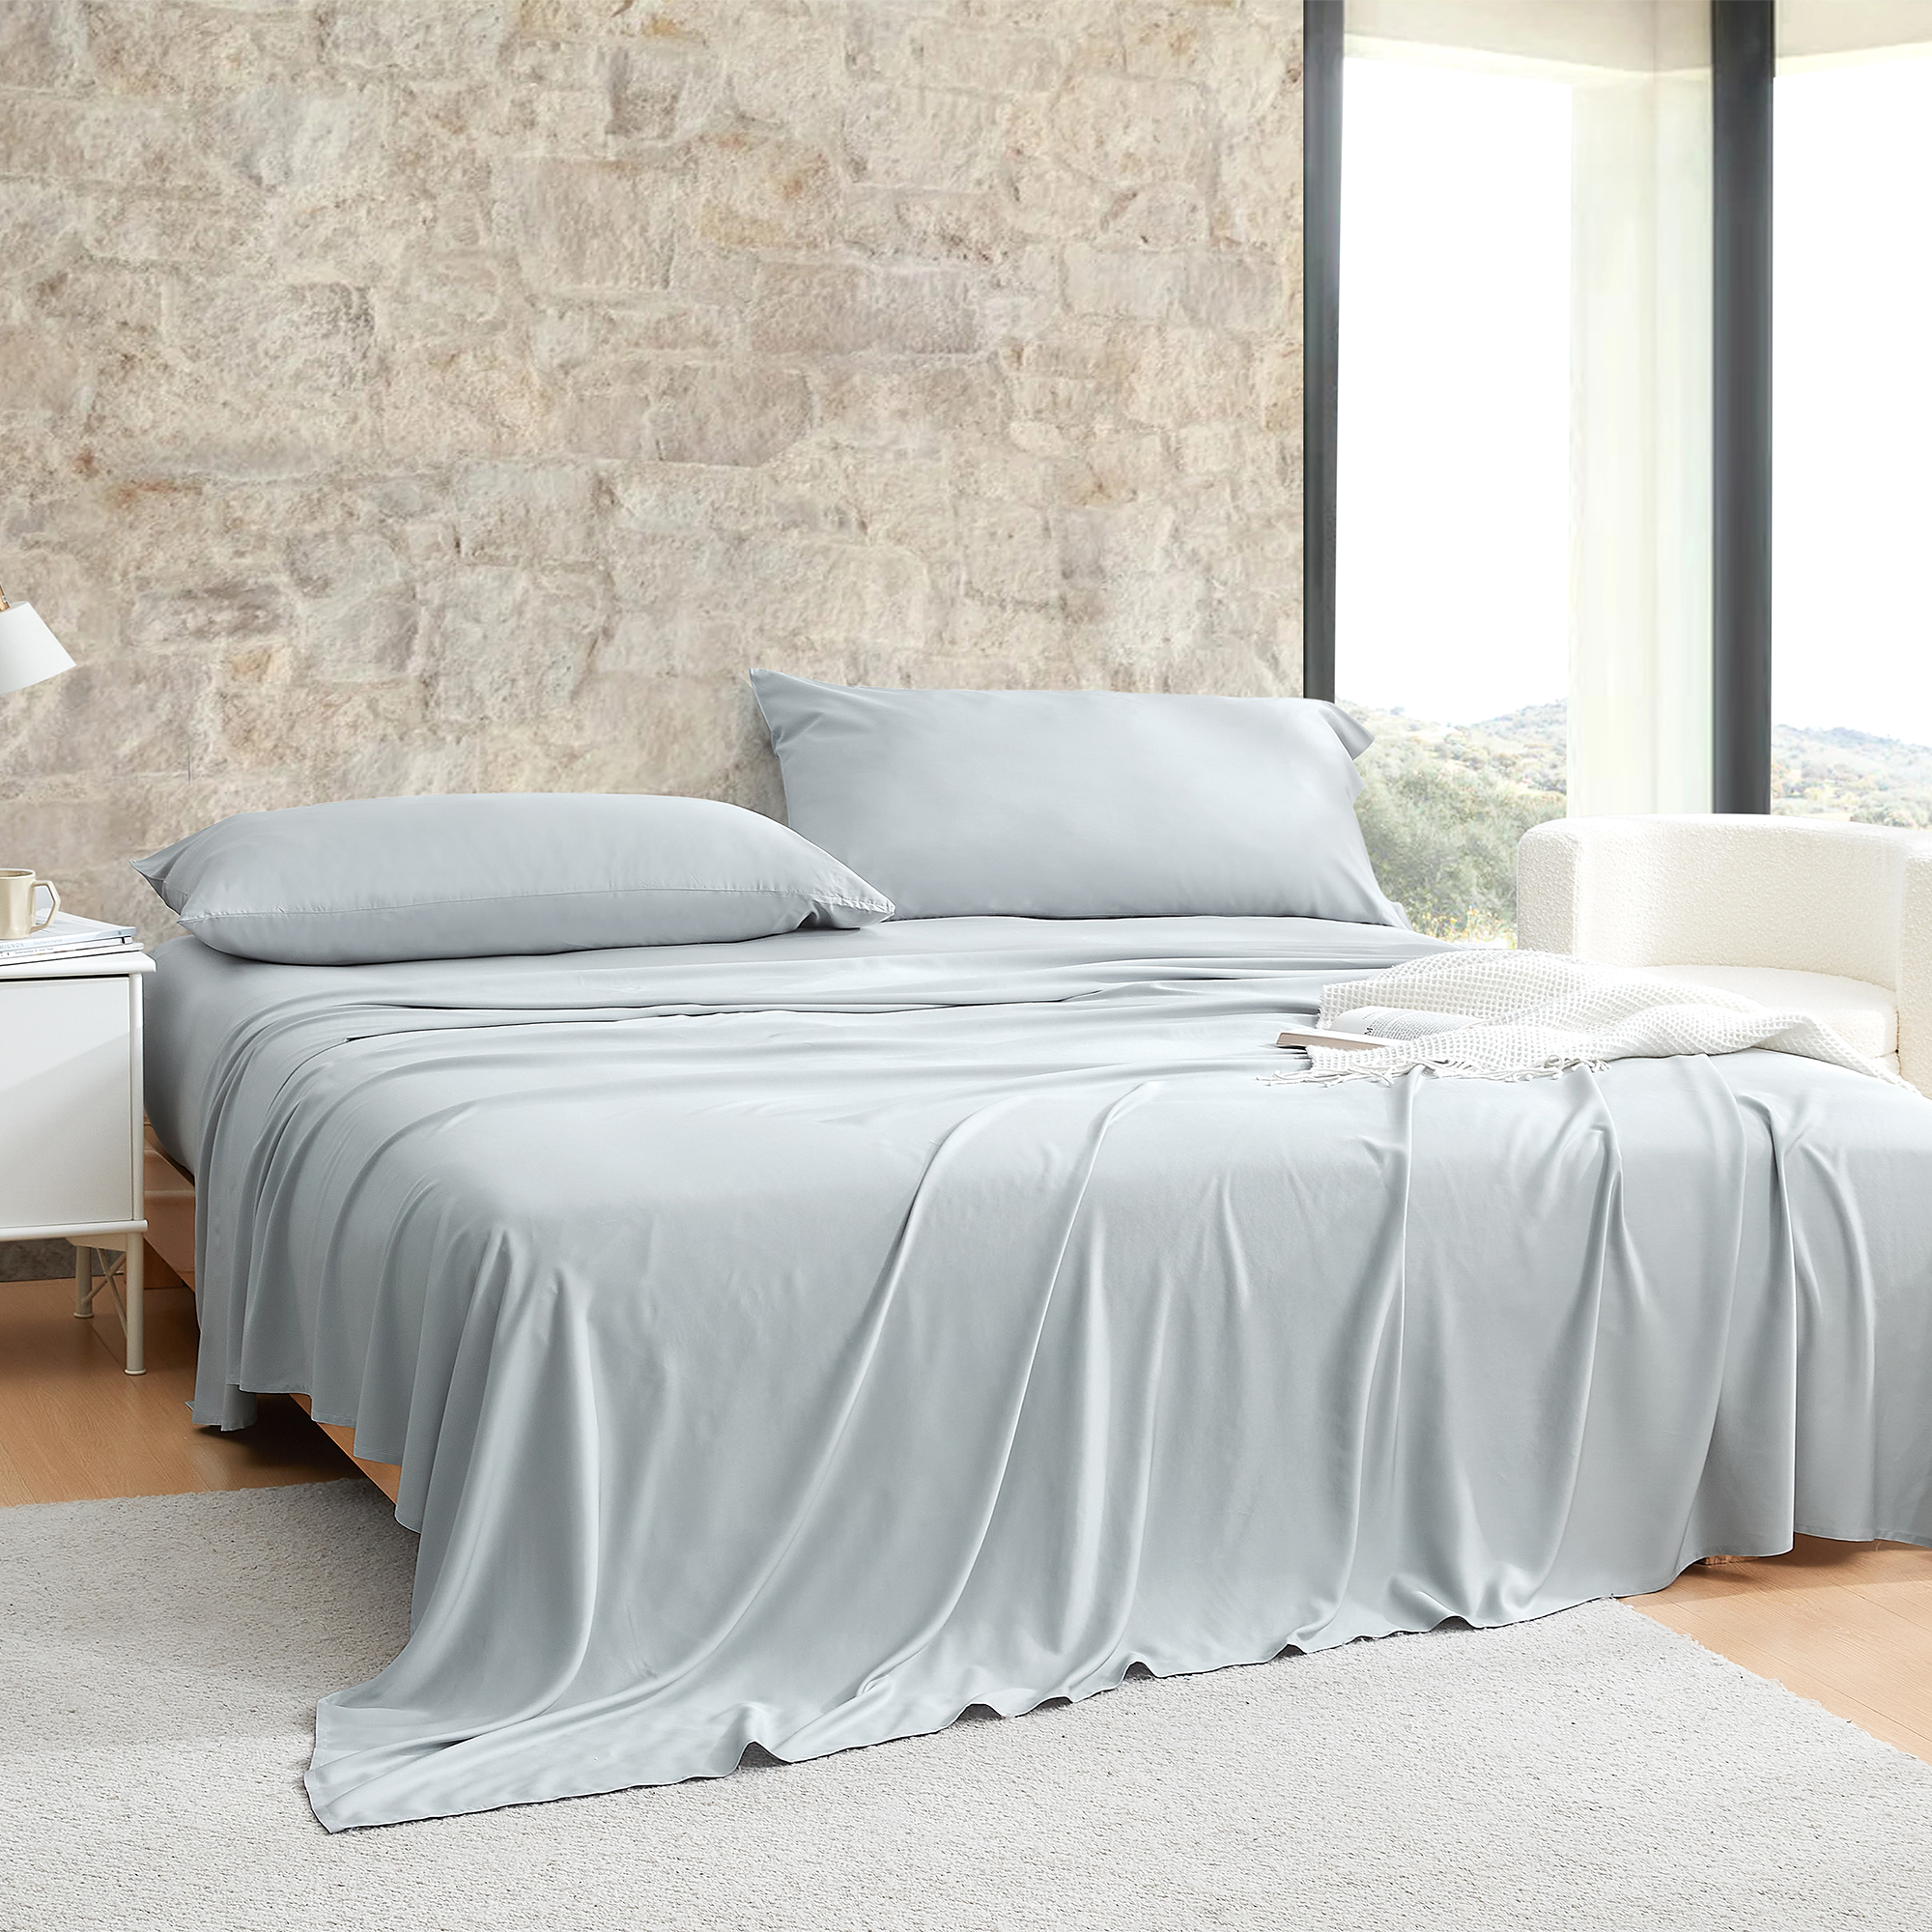 Snorze Cloud Sheet Set - Coma Inducer Ultra Cozy Bamboo - Glacier Gray